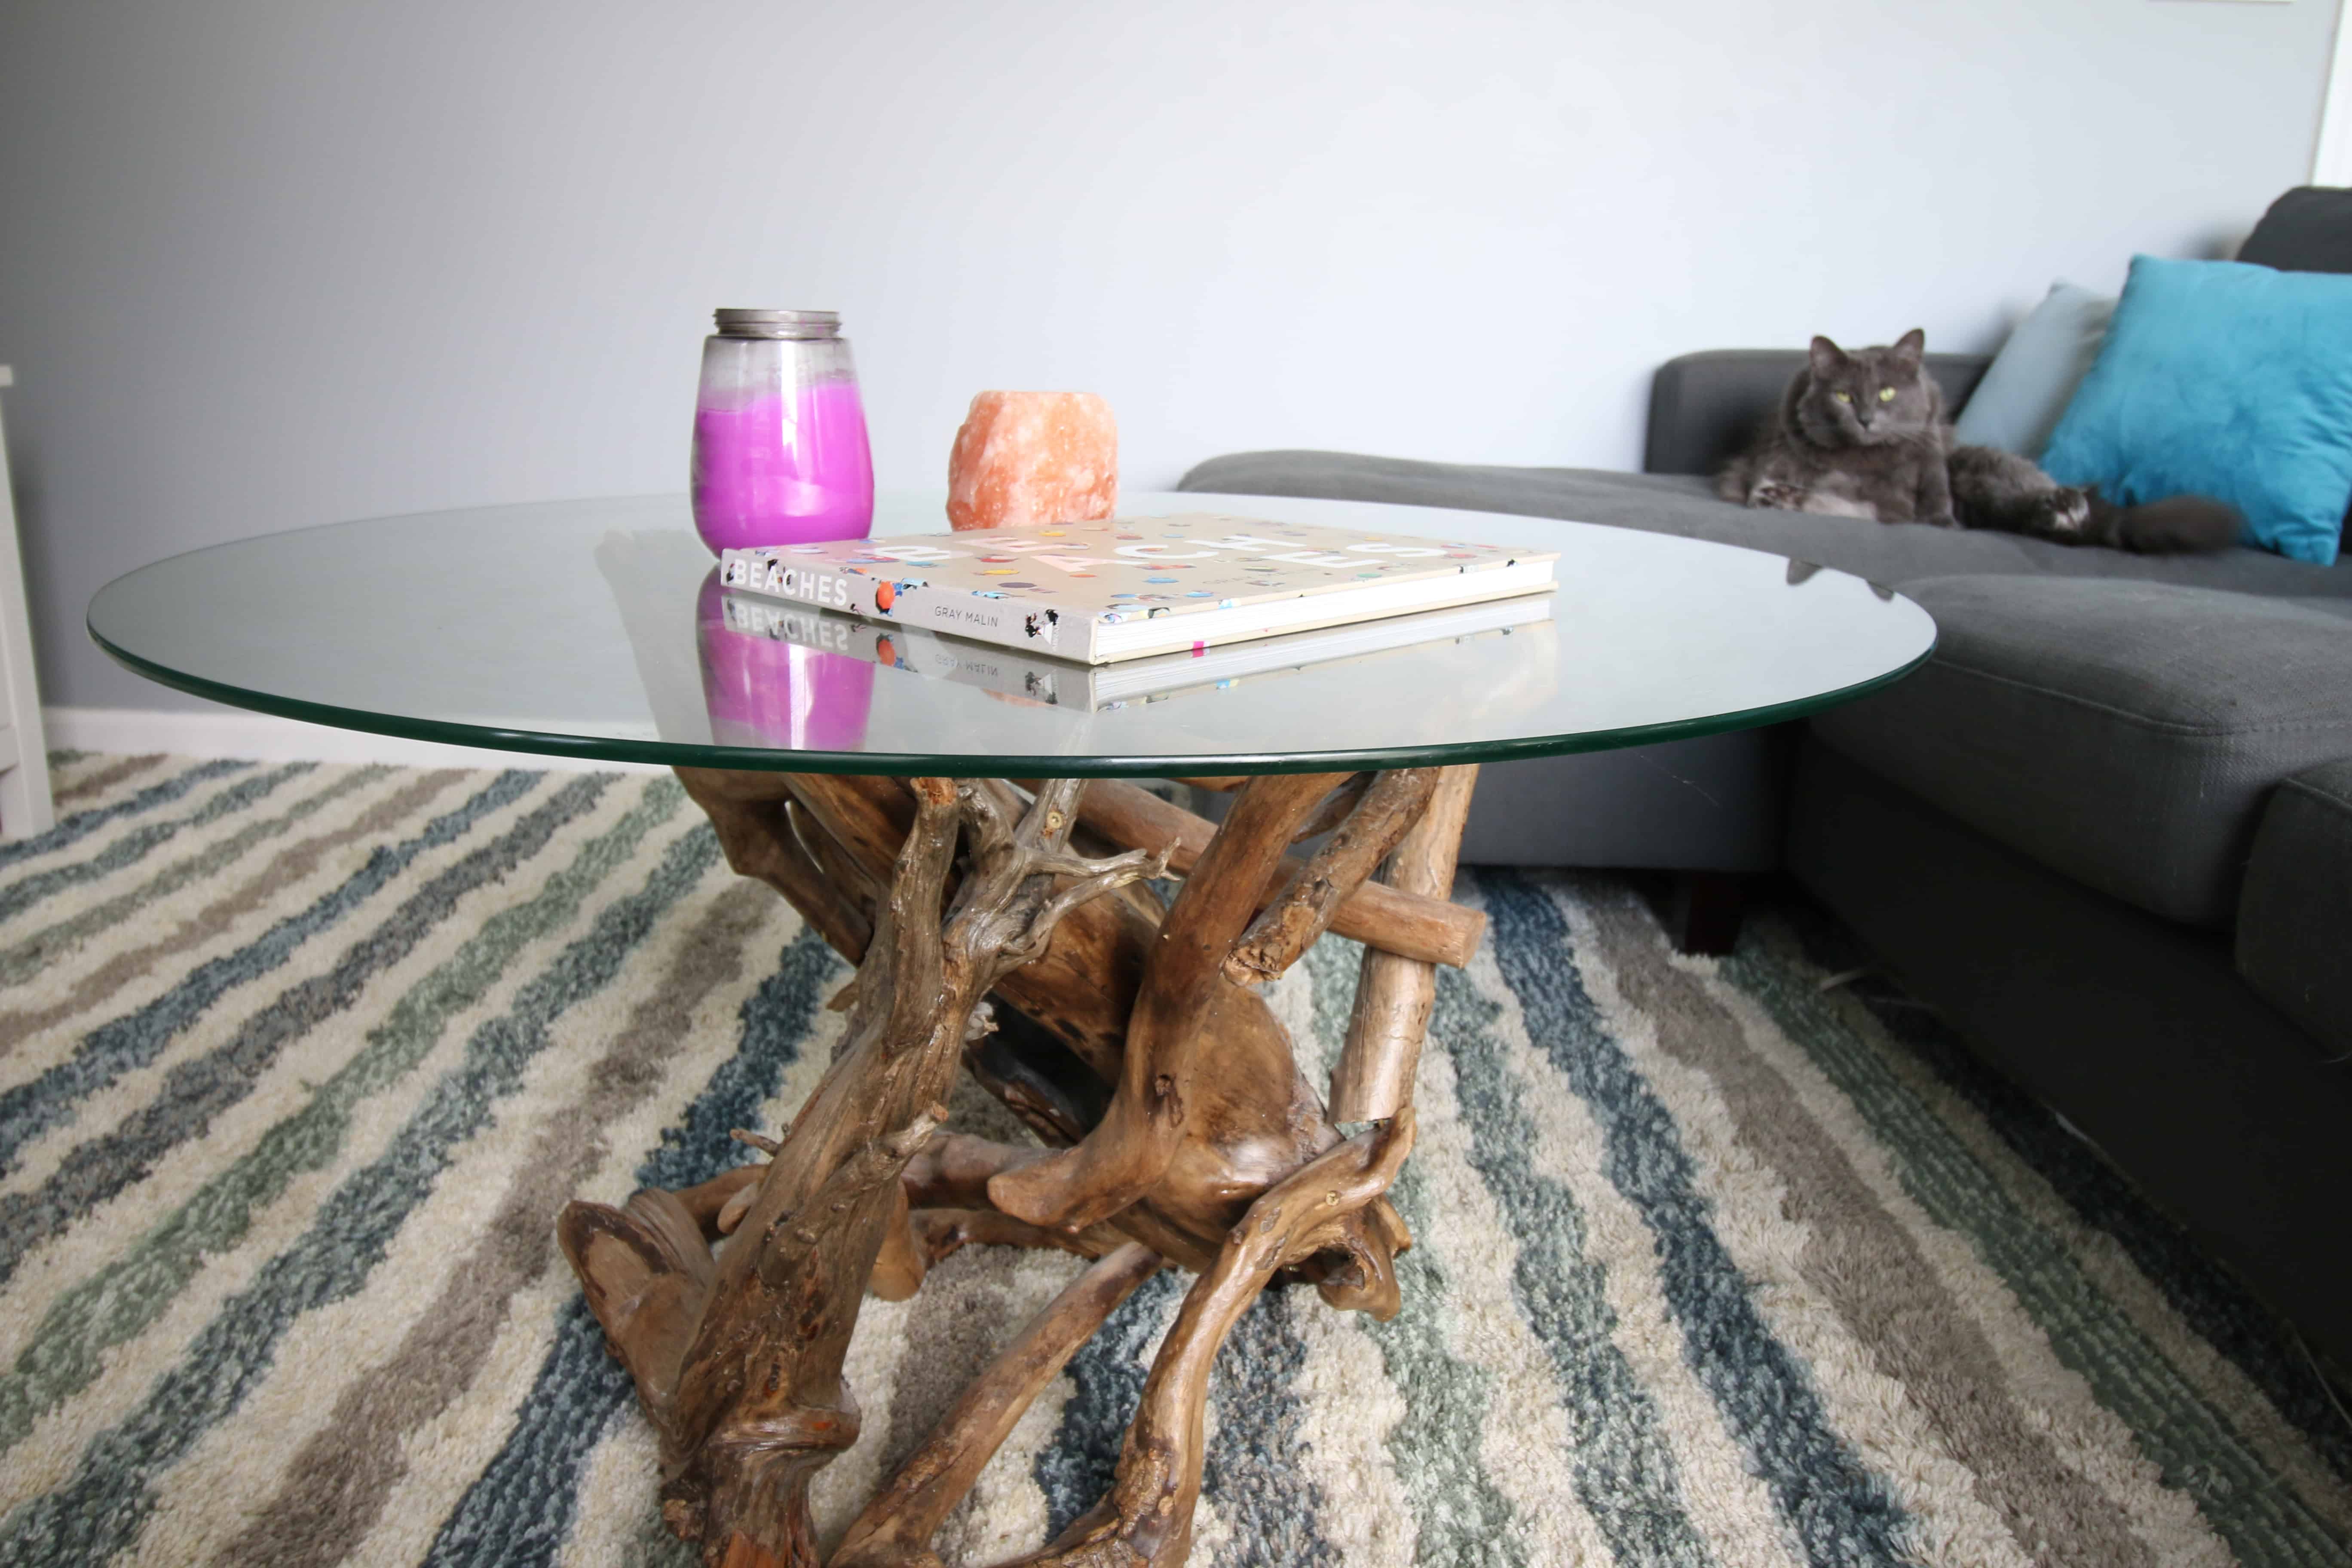 How To Make A Diy Driftwood Coffee Table, How To Make A Table From Driftwood